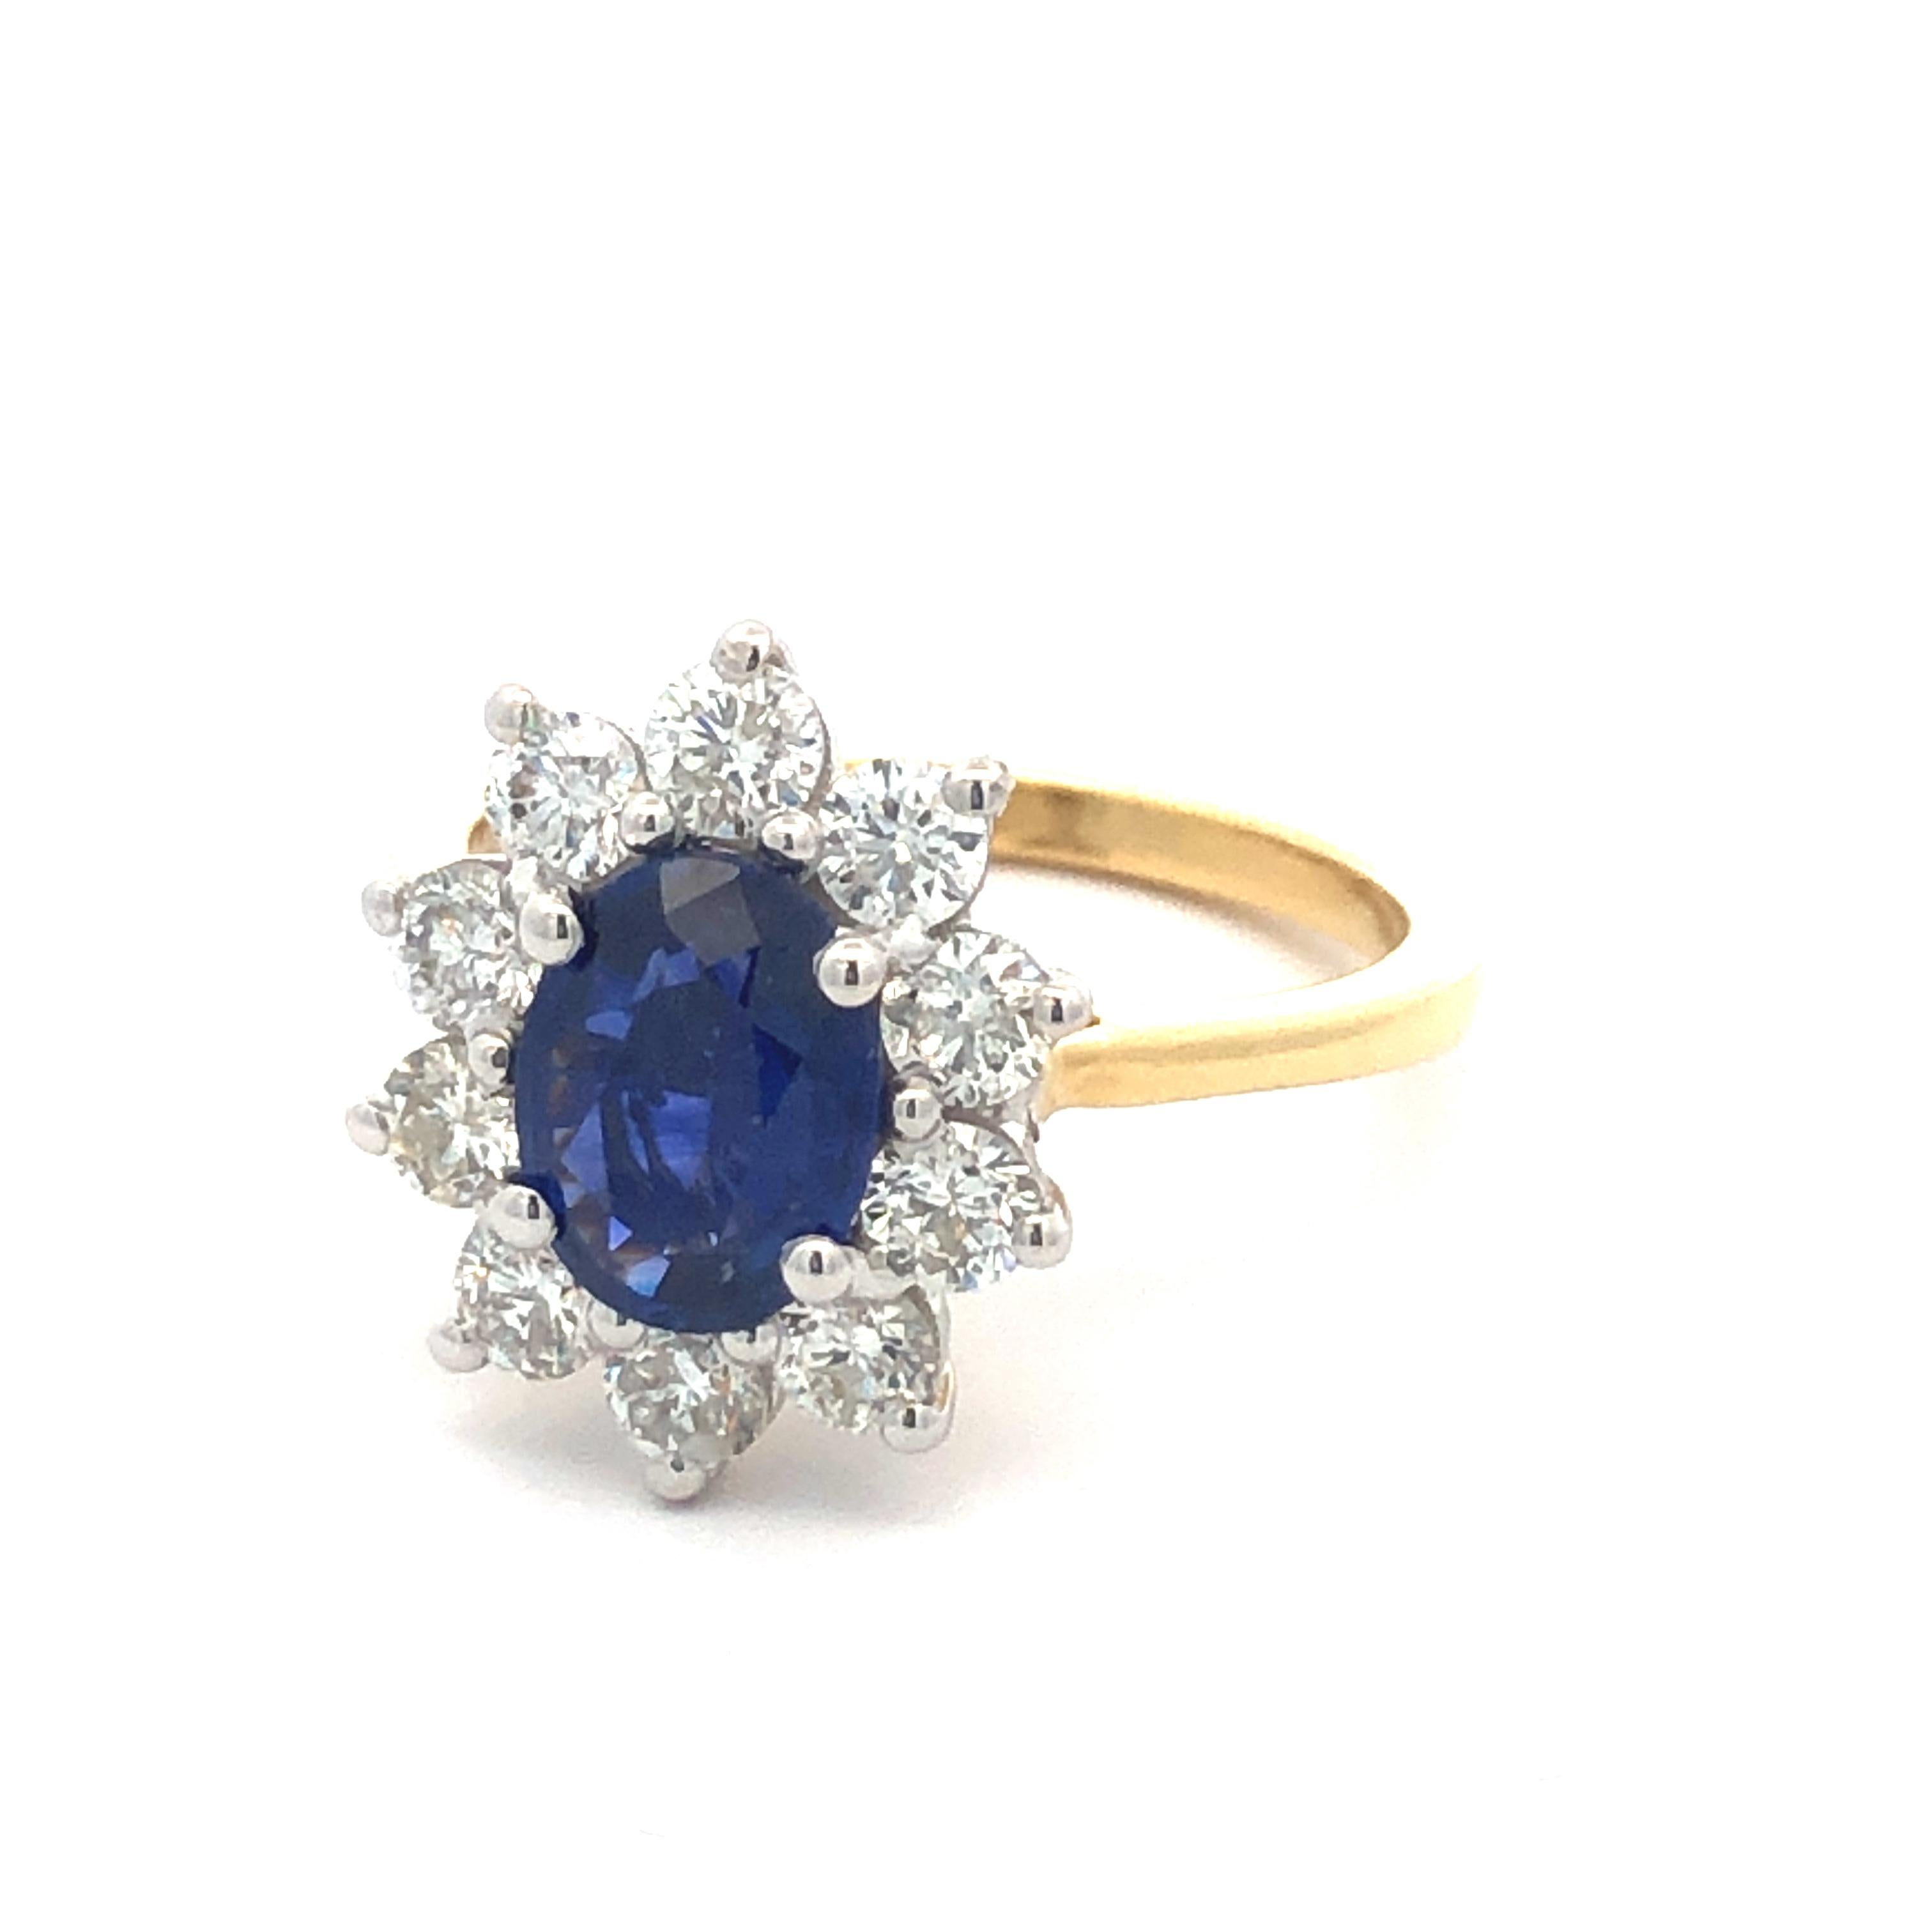 A bespoke lustrously large 2.51 carat total gem weight, having 1.50 Carat Blue Sapphire Dress / Engagement Ring surrounded by a claw set diamond halo With a total diamond weight of 1.01 carat diamonds white colour G, clarity VS / SI round brilliant